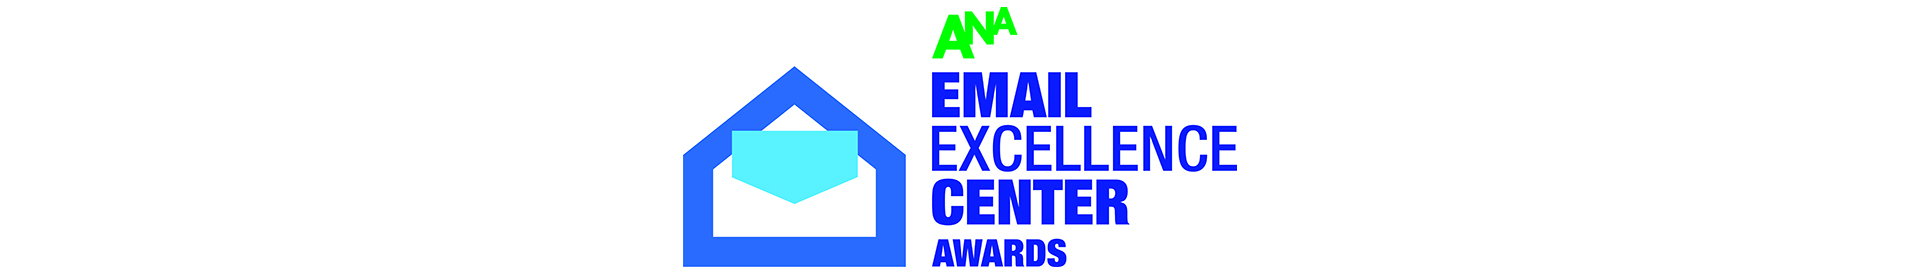 Email Excellence Center Awards banner